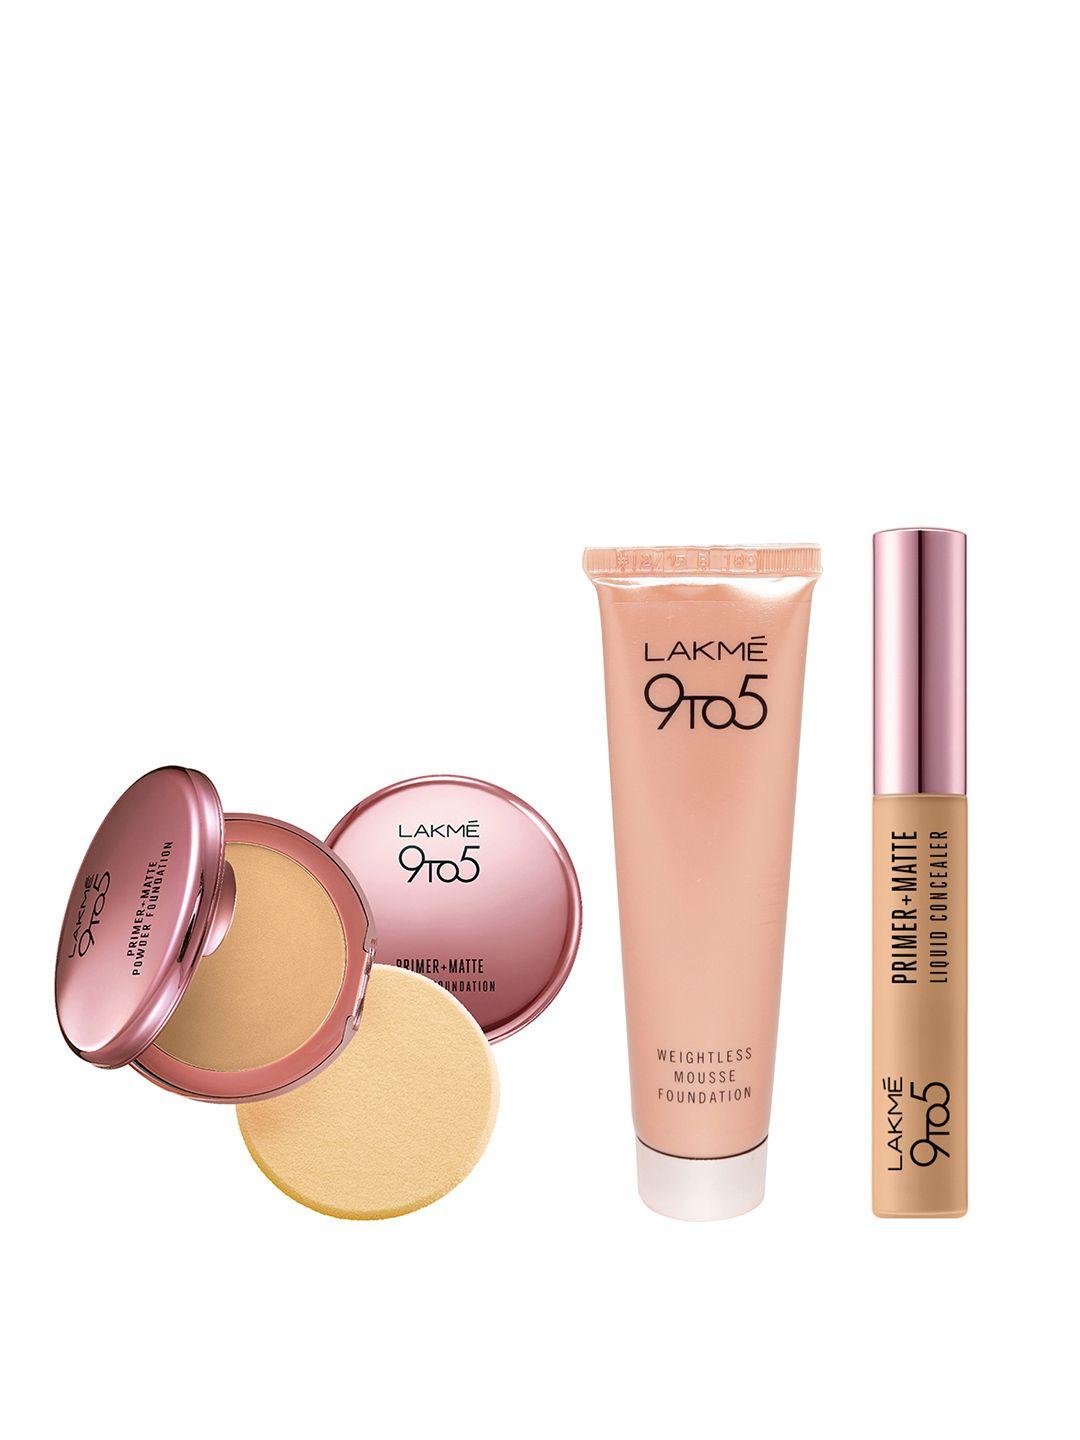 lakme set of 9to5 primer+matte concealer & compact with mousse foundation